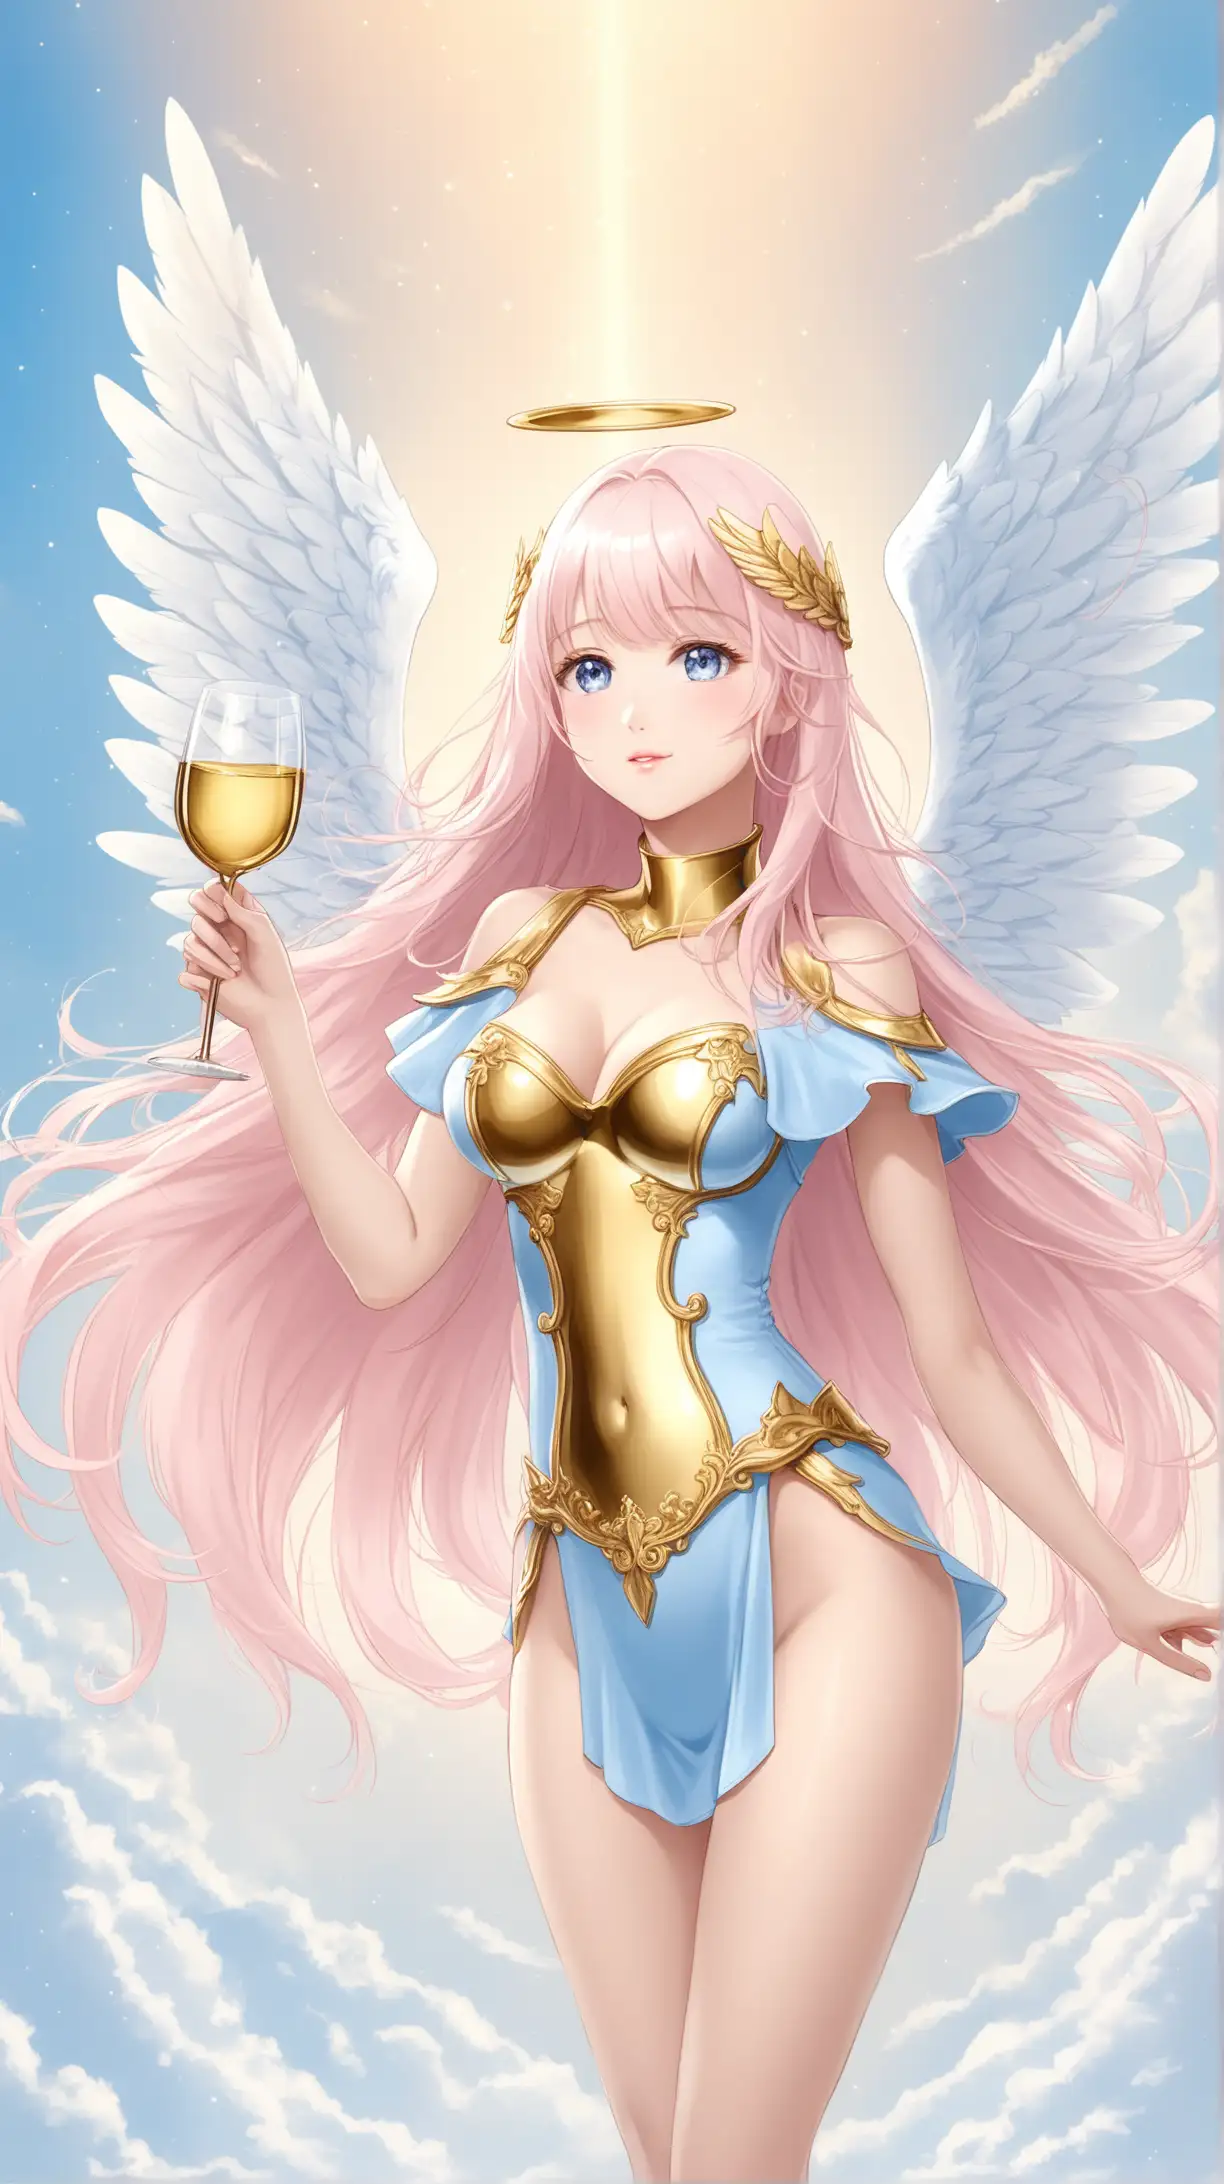 Ethereal Angelic Beauty Holding Golden Wine Glass in Heavenly Atmosphere